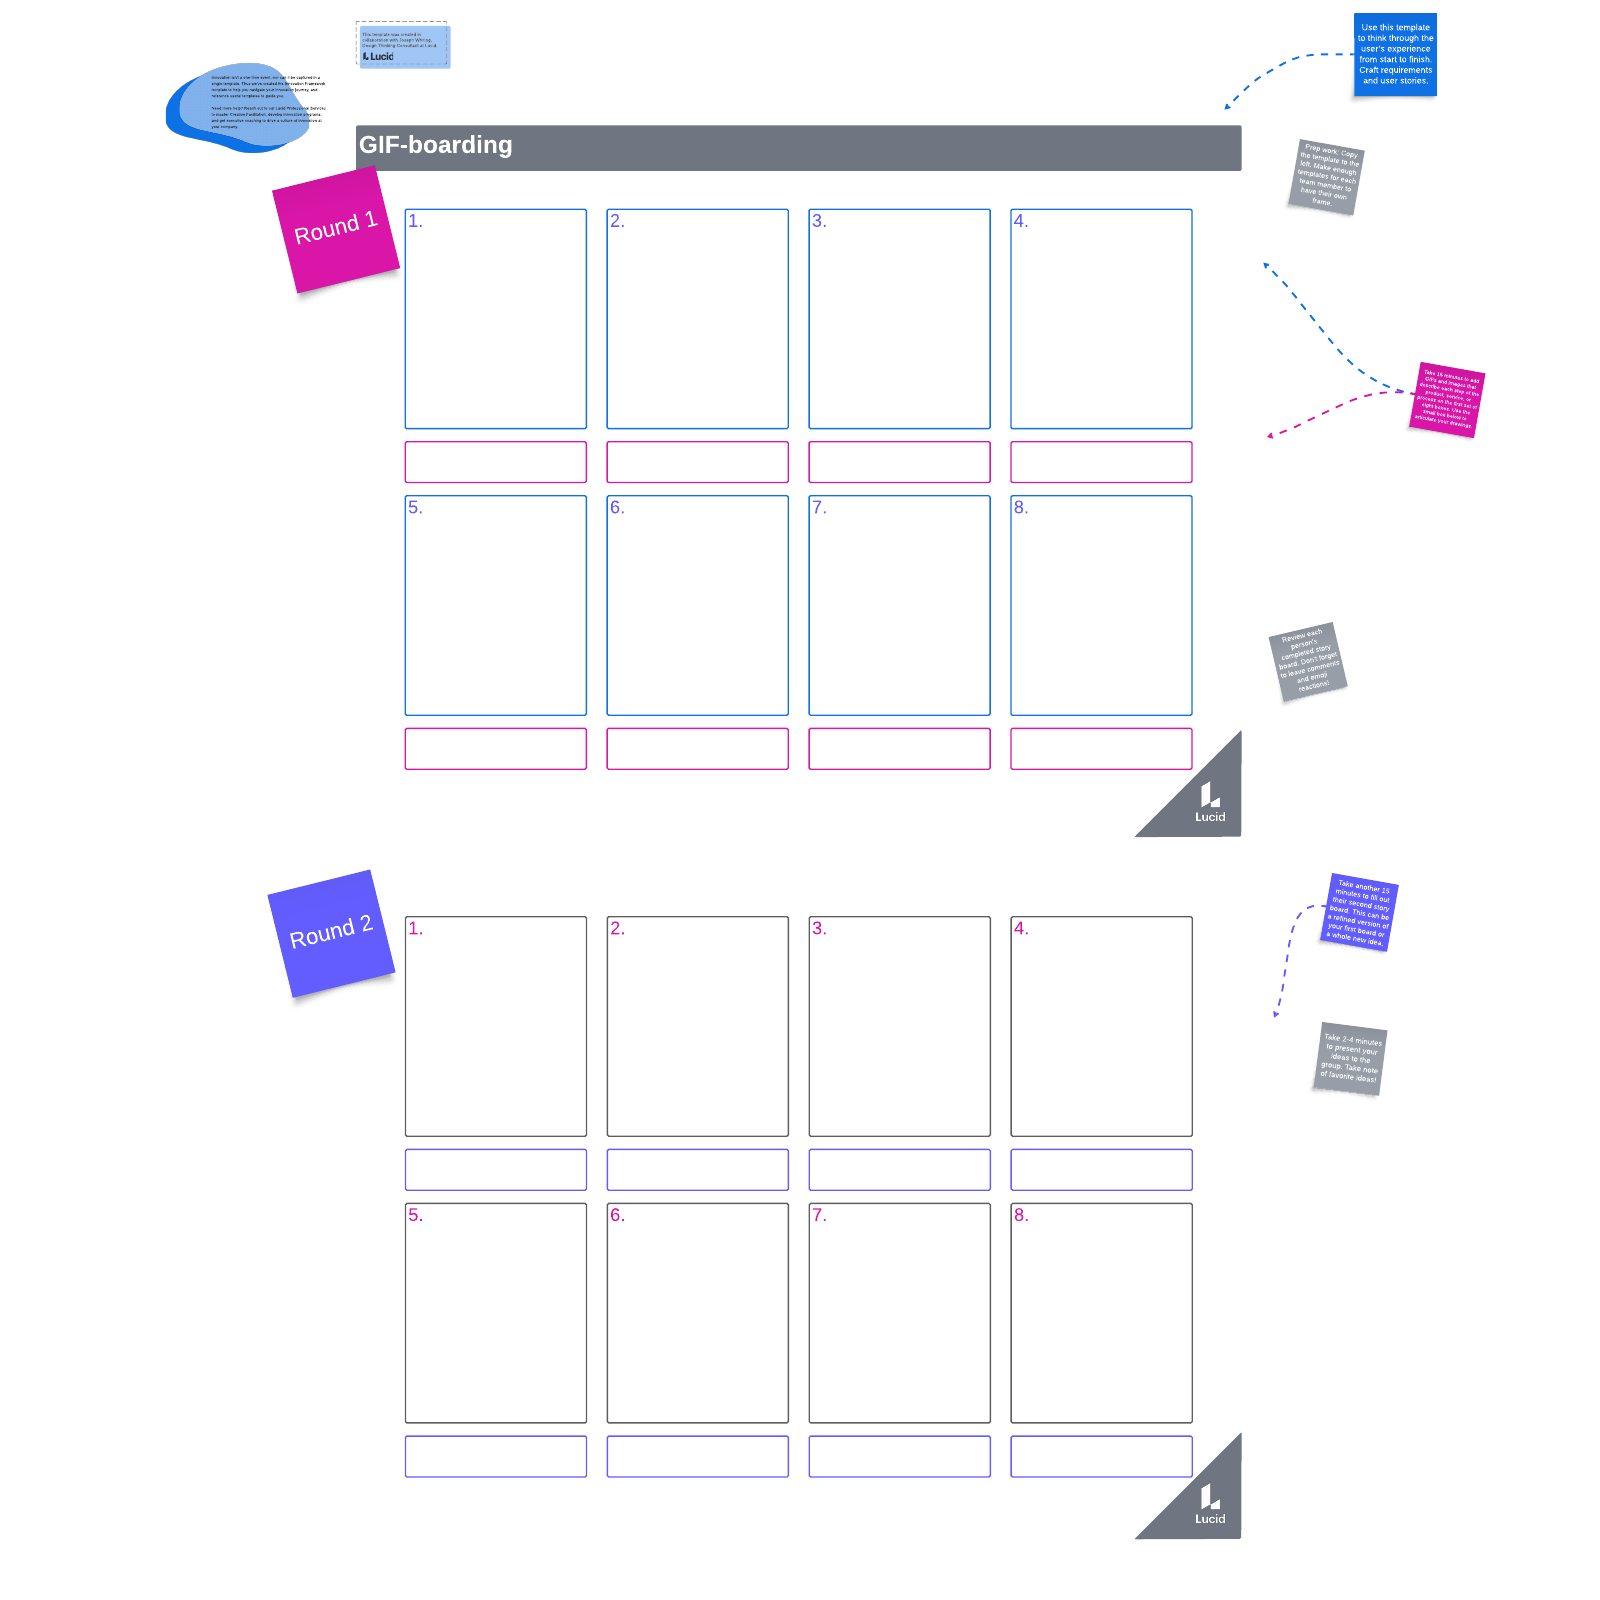 Board template for user experience research using GIFs and images